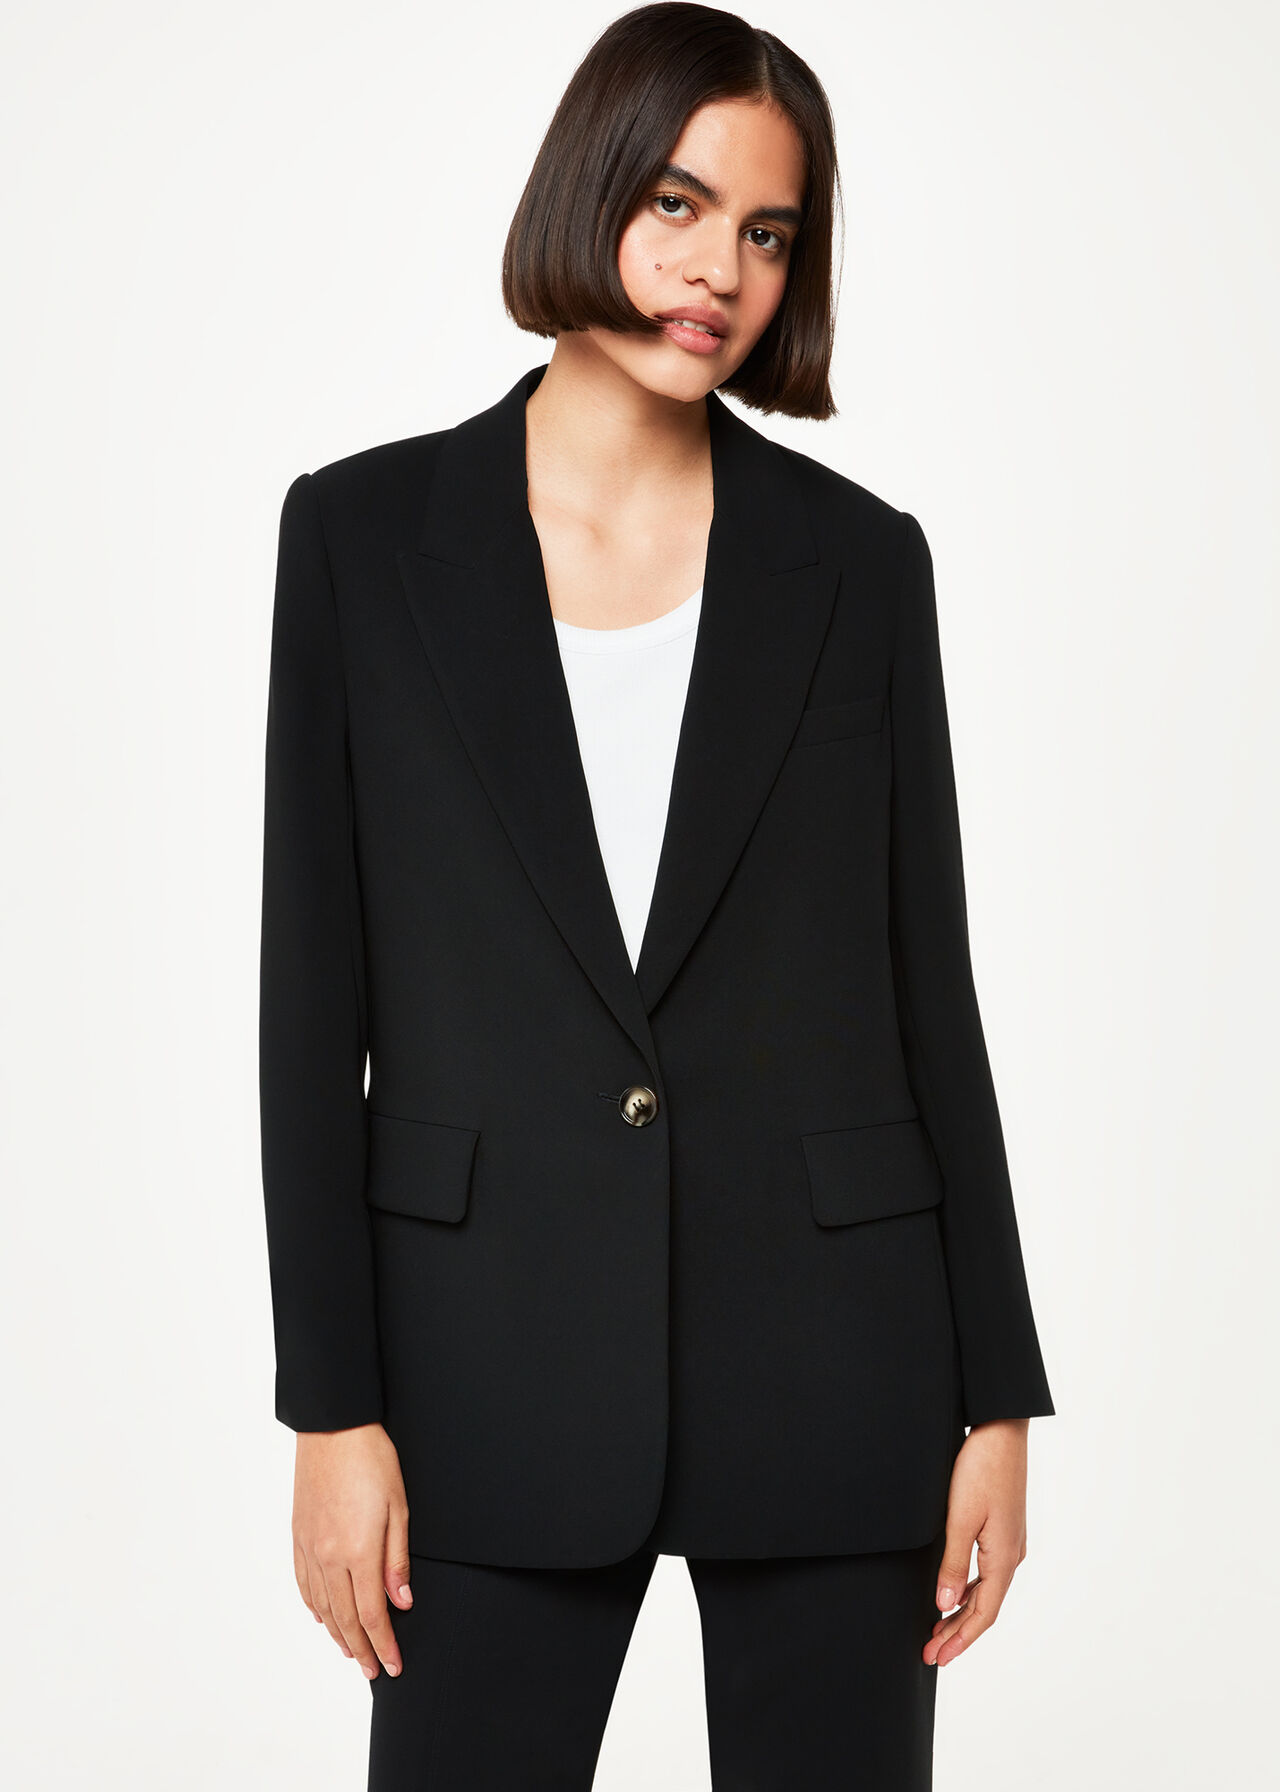 Black Boyfriend Blazer in a Relaxed Fit, Whistles